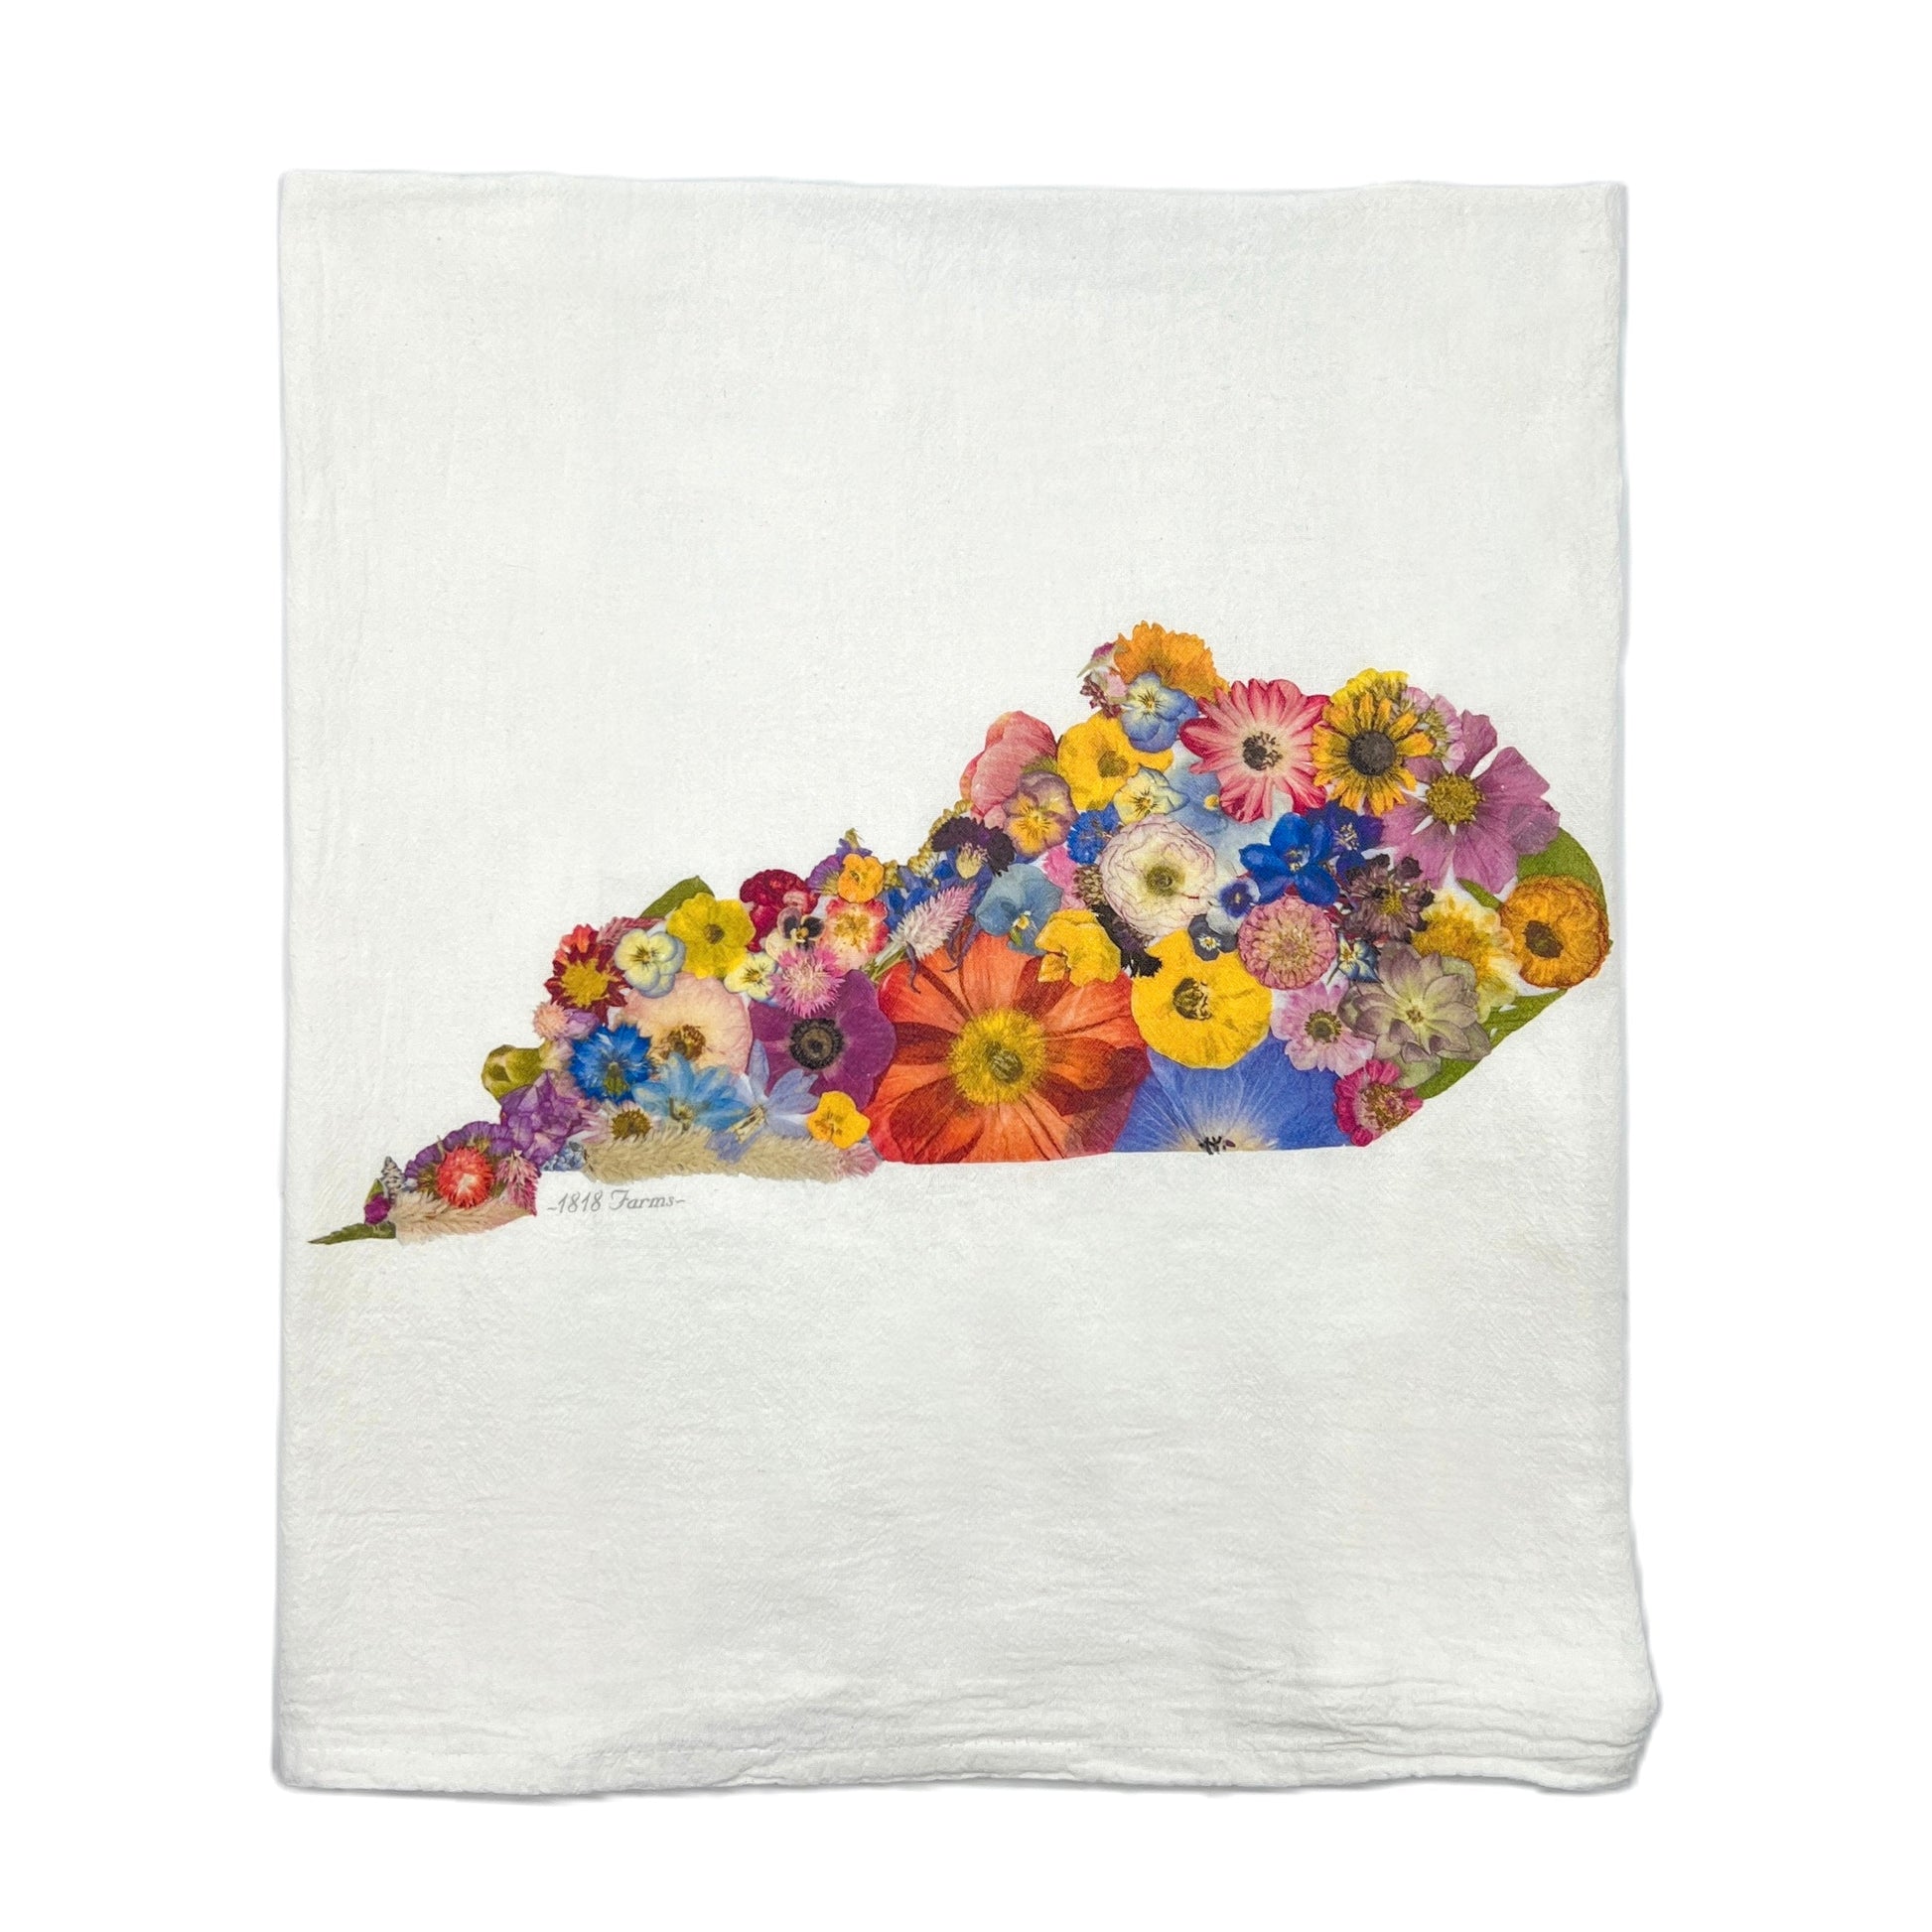 State Themed Flour Sack Towel  - "Where I Bloom" Collection Towel 1818 Farms Kentucky  